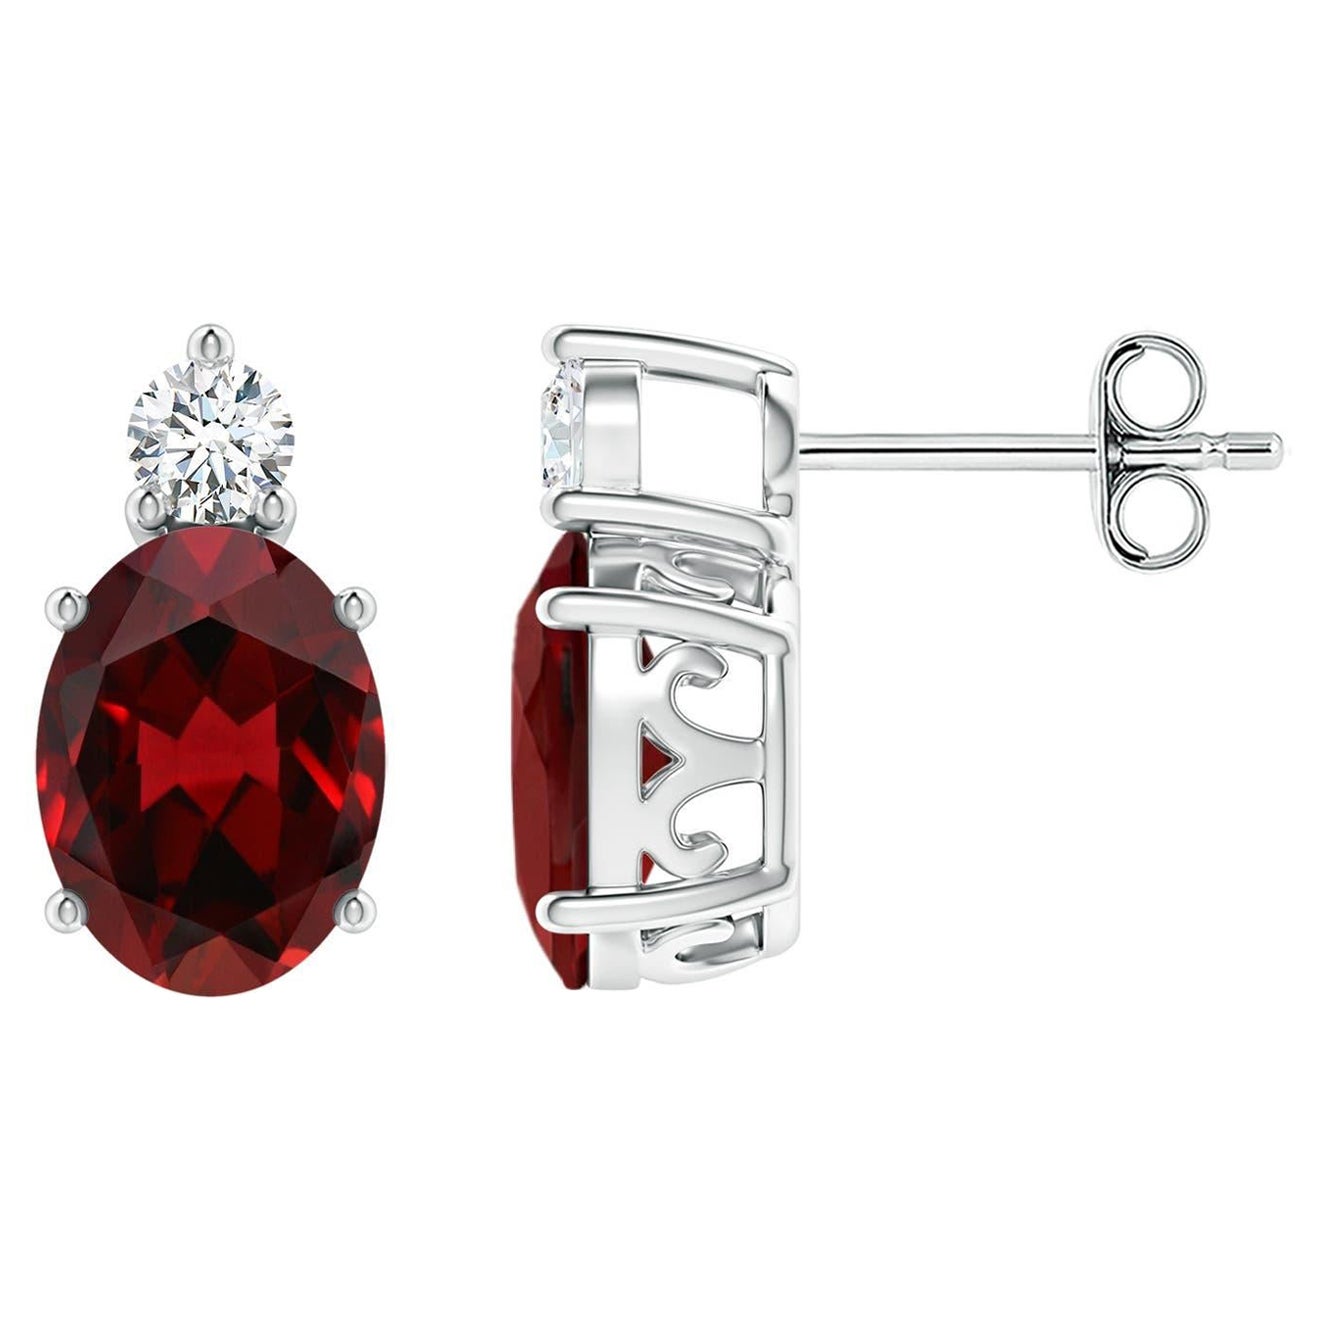 Natural Oval 2.9ct Garnet Stud Earrings with Diamond in 925 Sterling Silver